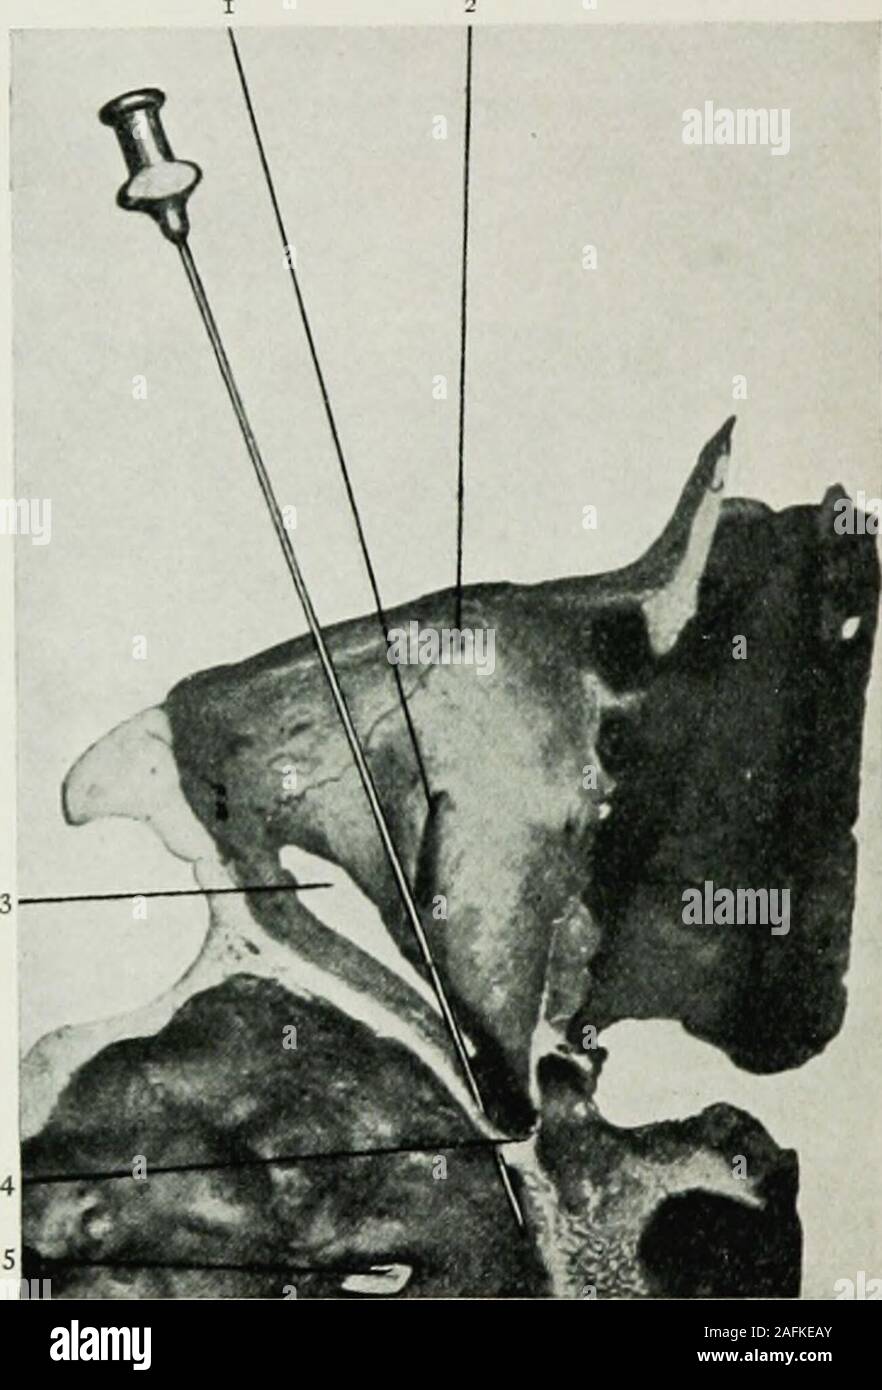 . Local and regional anesthesia : with chapters on spinal, epidural, paravertebral, and parasacral analgesia, and on other applications of local and regional anesthesia to the surgery of the eye, ear, nose and throat, and to dental practice. Fig. 17S.—Needle in position in Matas intra-orbital injection within foramen rotundum. (Braun.) sphenomaxillary fossa, and for a short distance through the spheno-maxillary fissure, and emerge upon the rim of the orbit just internal 5 LOCAL ANESTHESIA to its inferior external angle, at a distance of from 4 to 5 cm., varyingsomewhat in different skulls. It Stock Photo